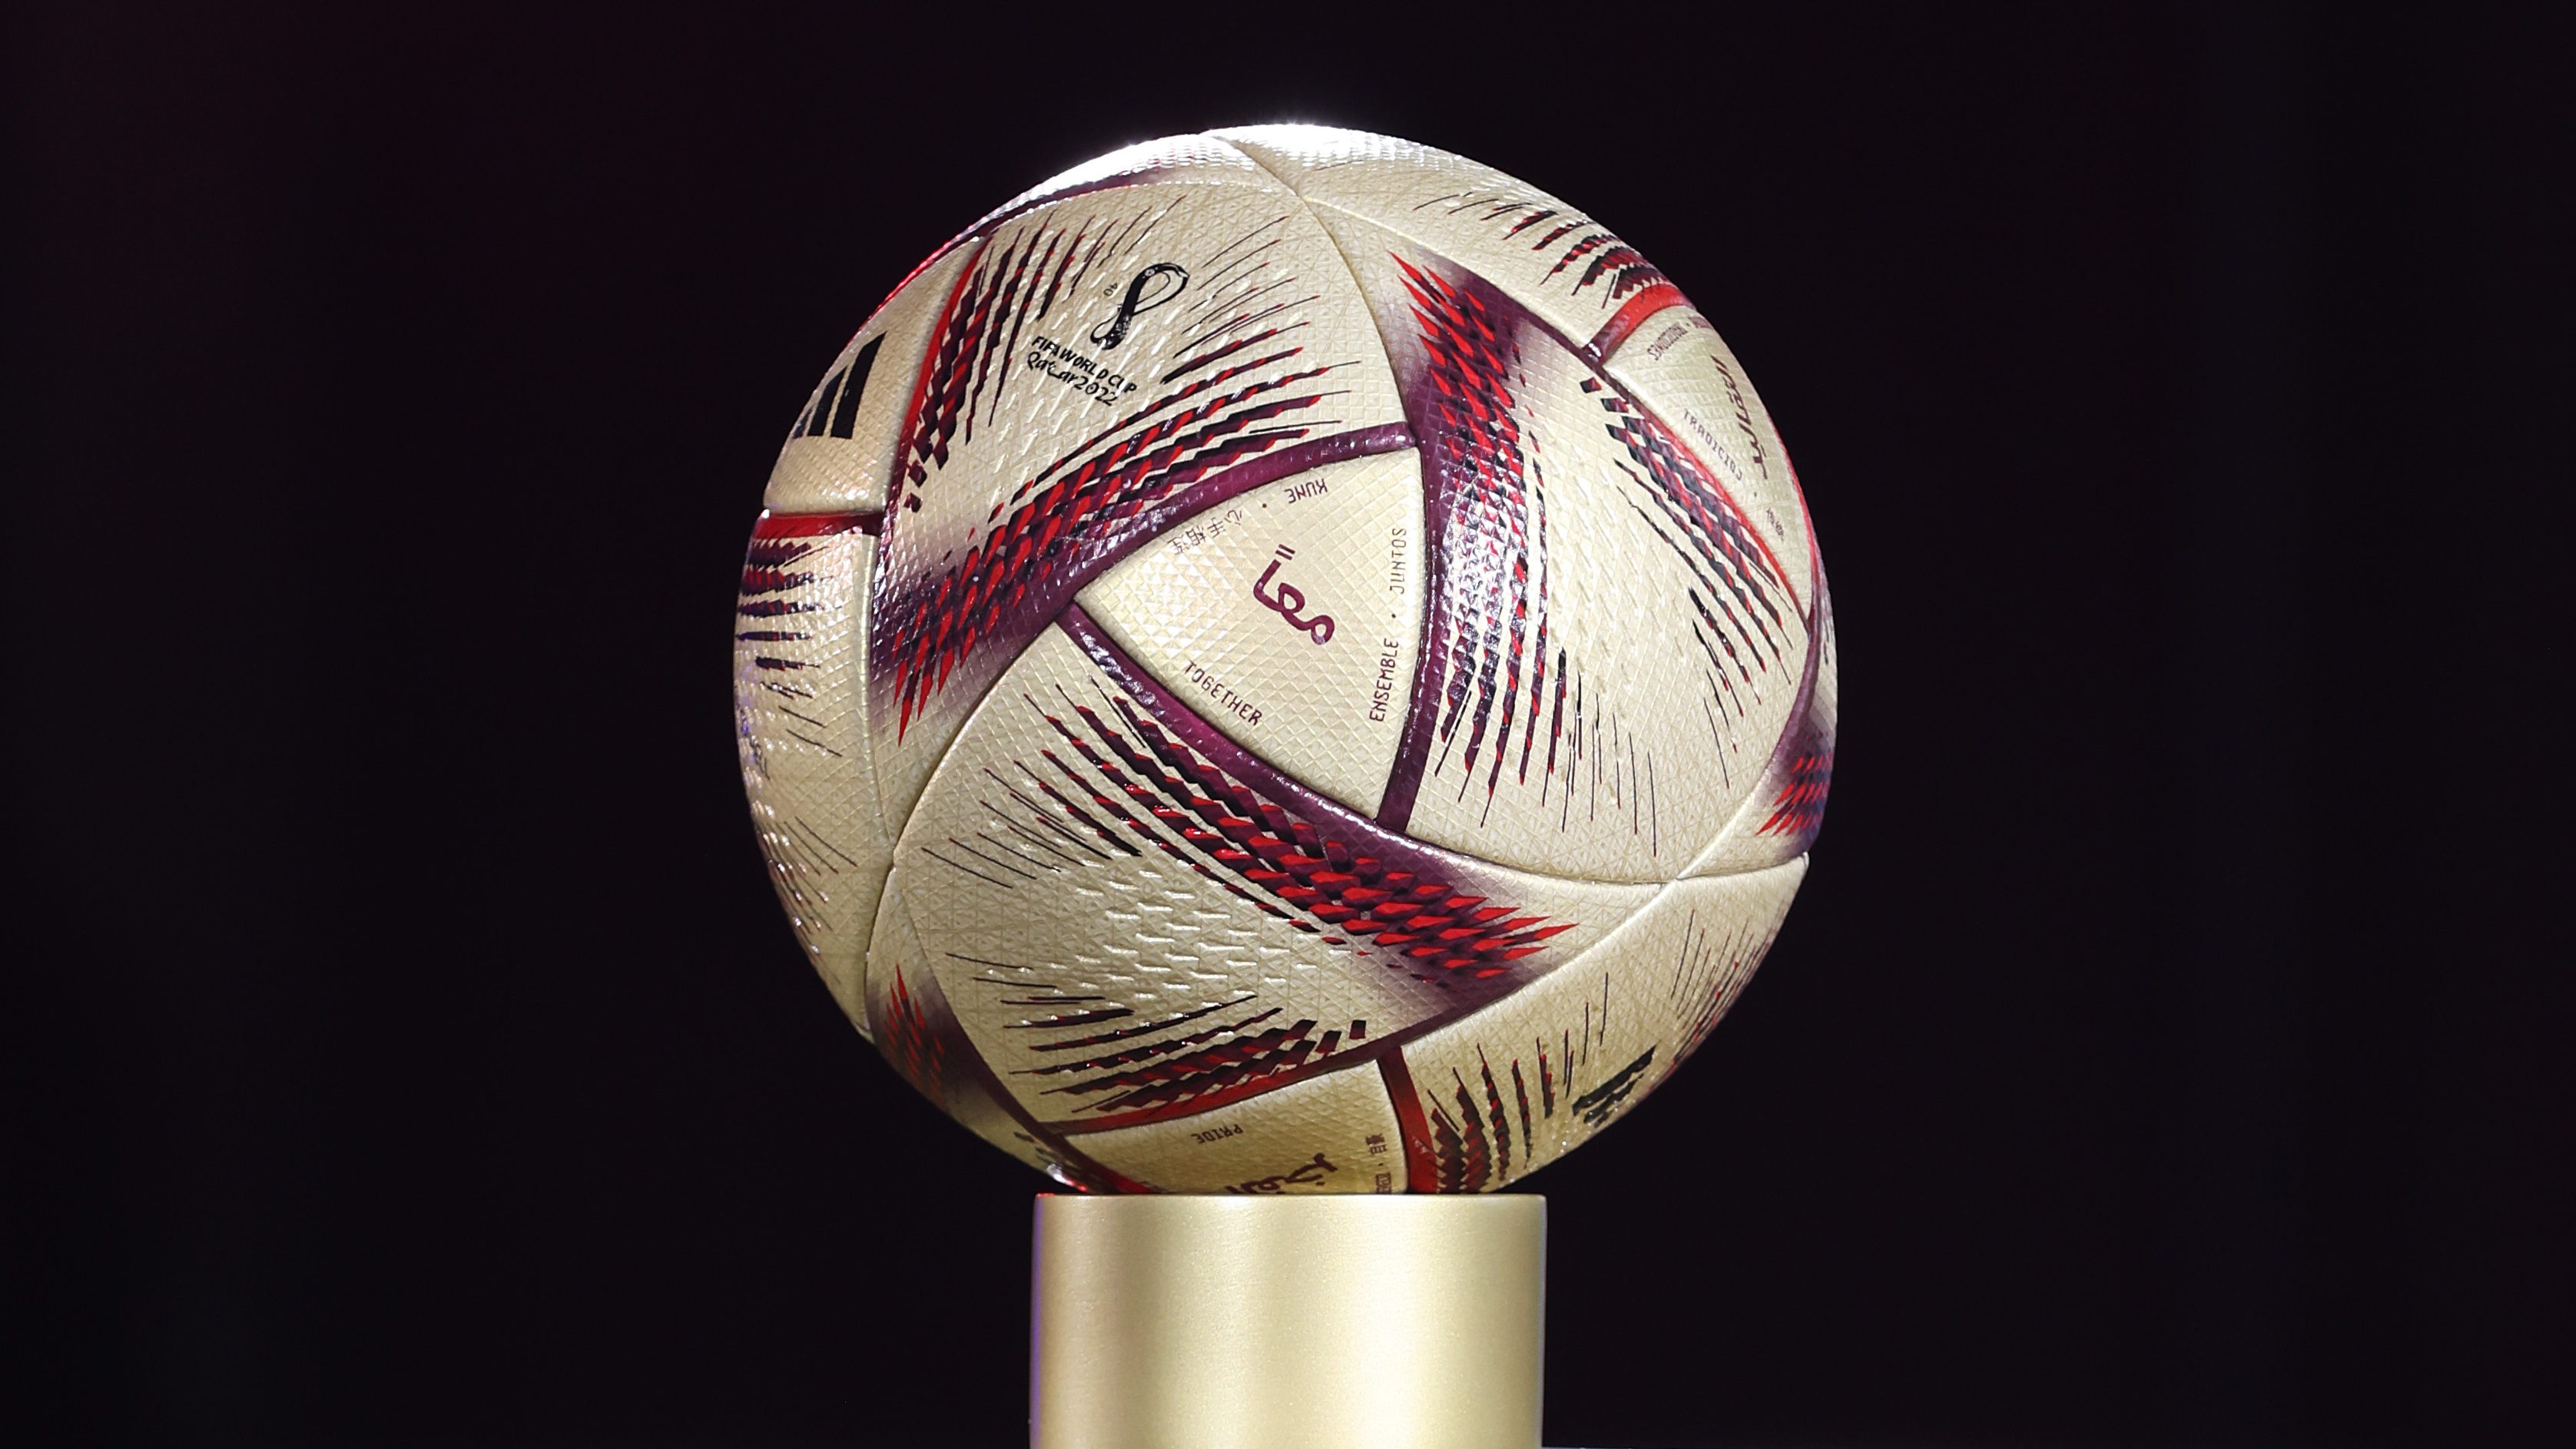 Al Hilm Unveiled as Official Ball of 2022 FIFA World Cup Semifinals, Final 